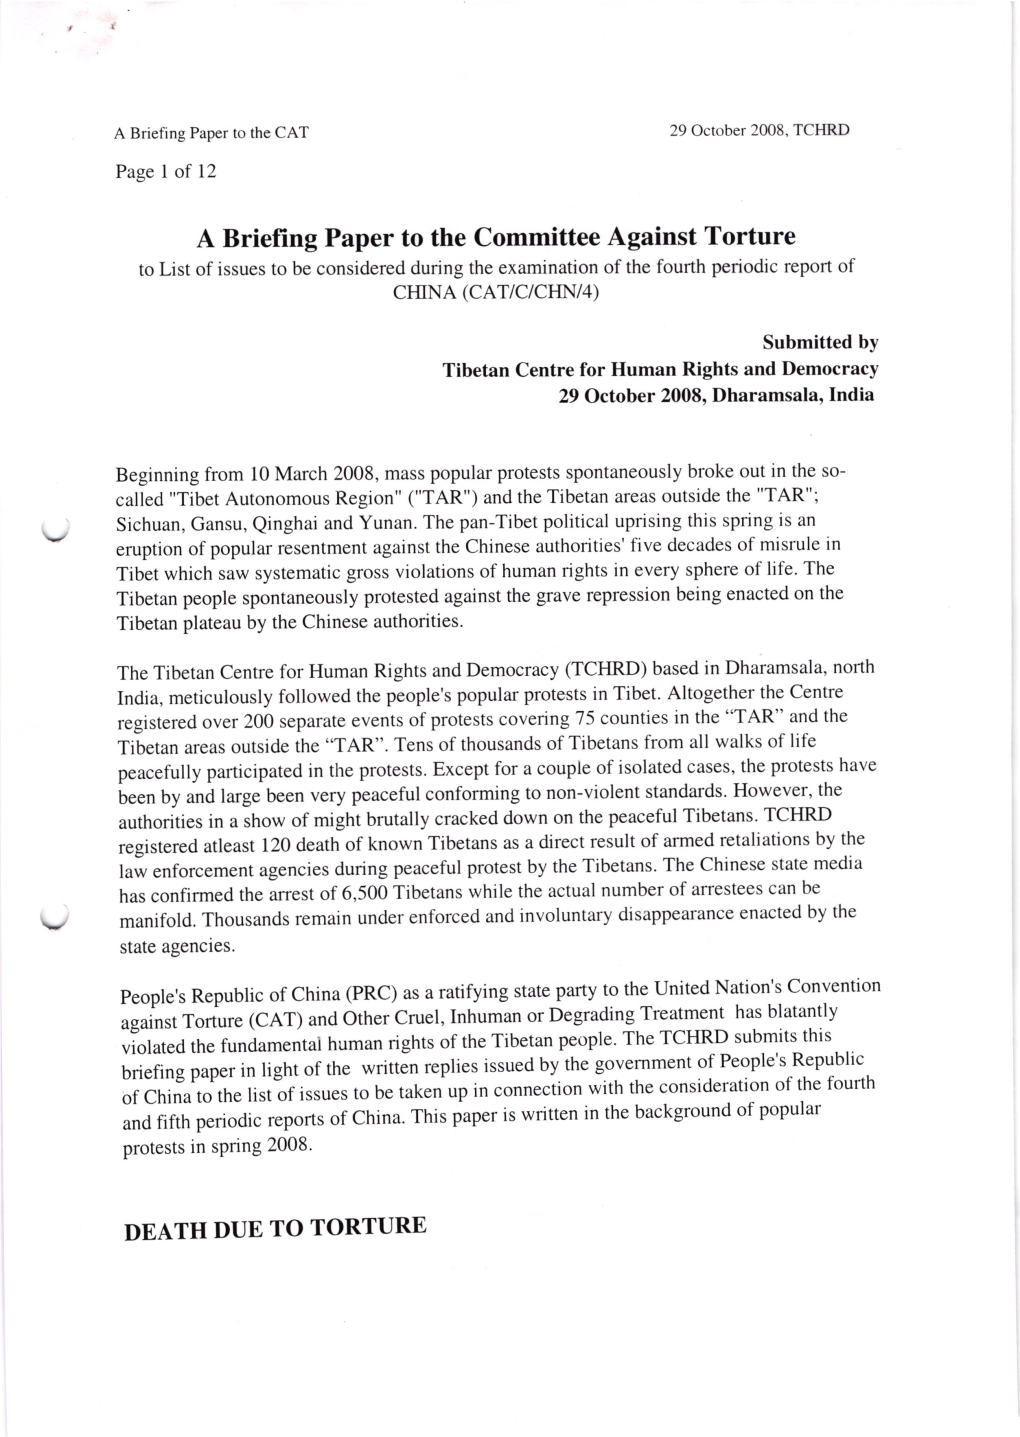 A Briefing Paper to the Committee Against Torture 2008